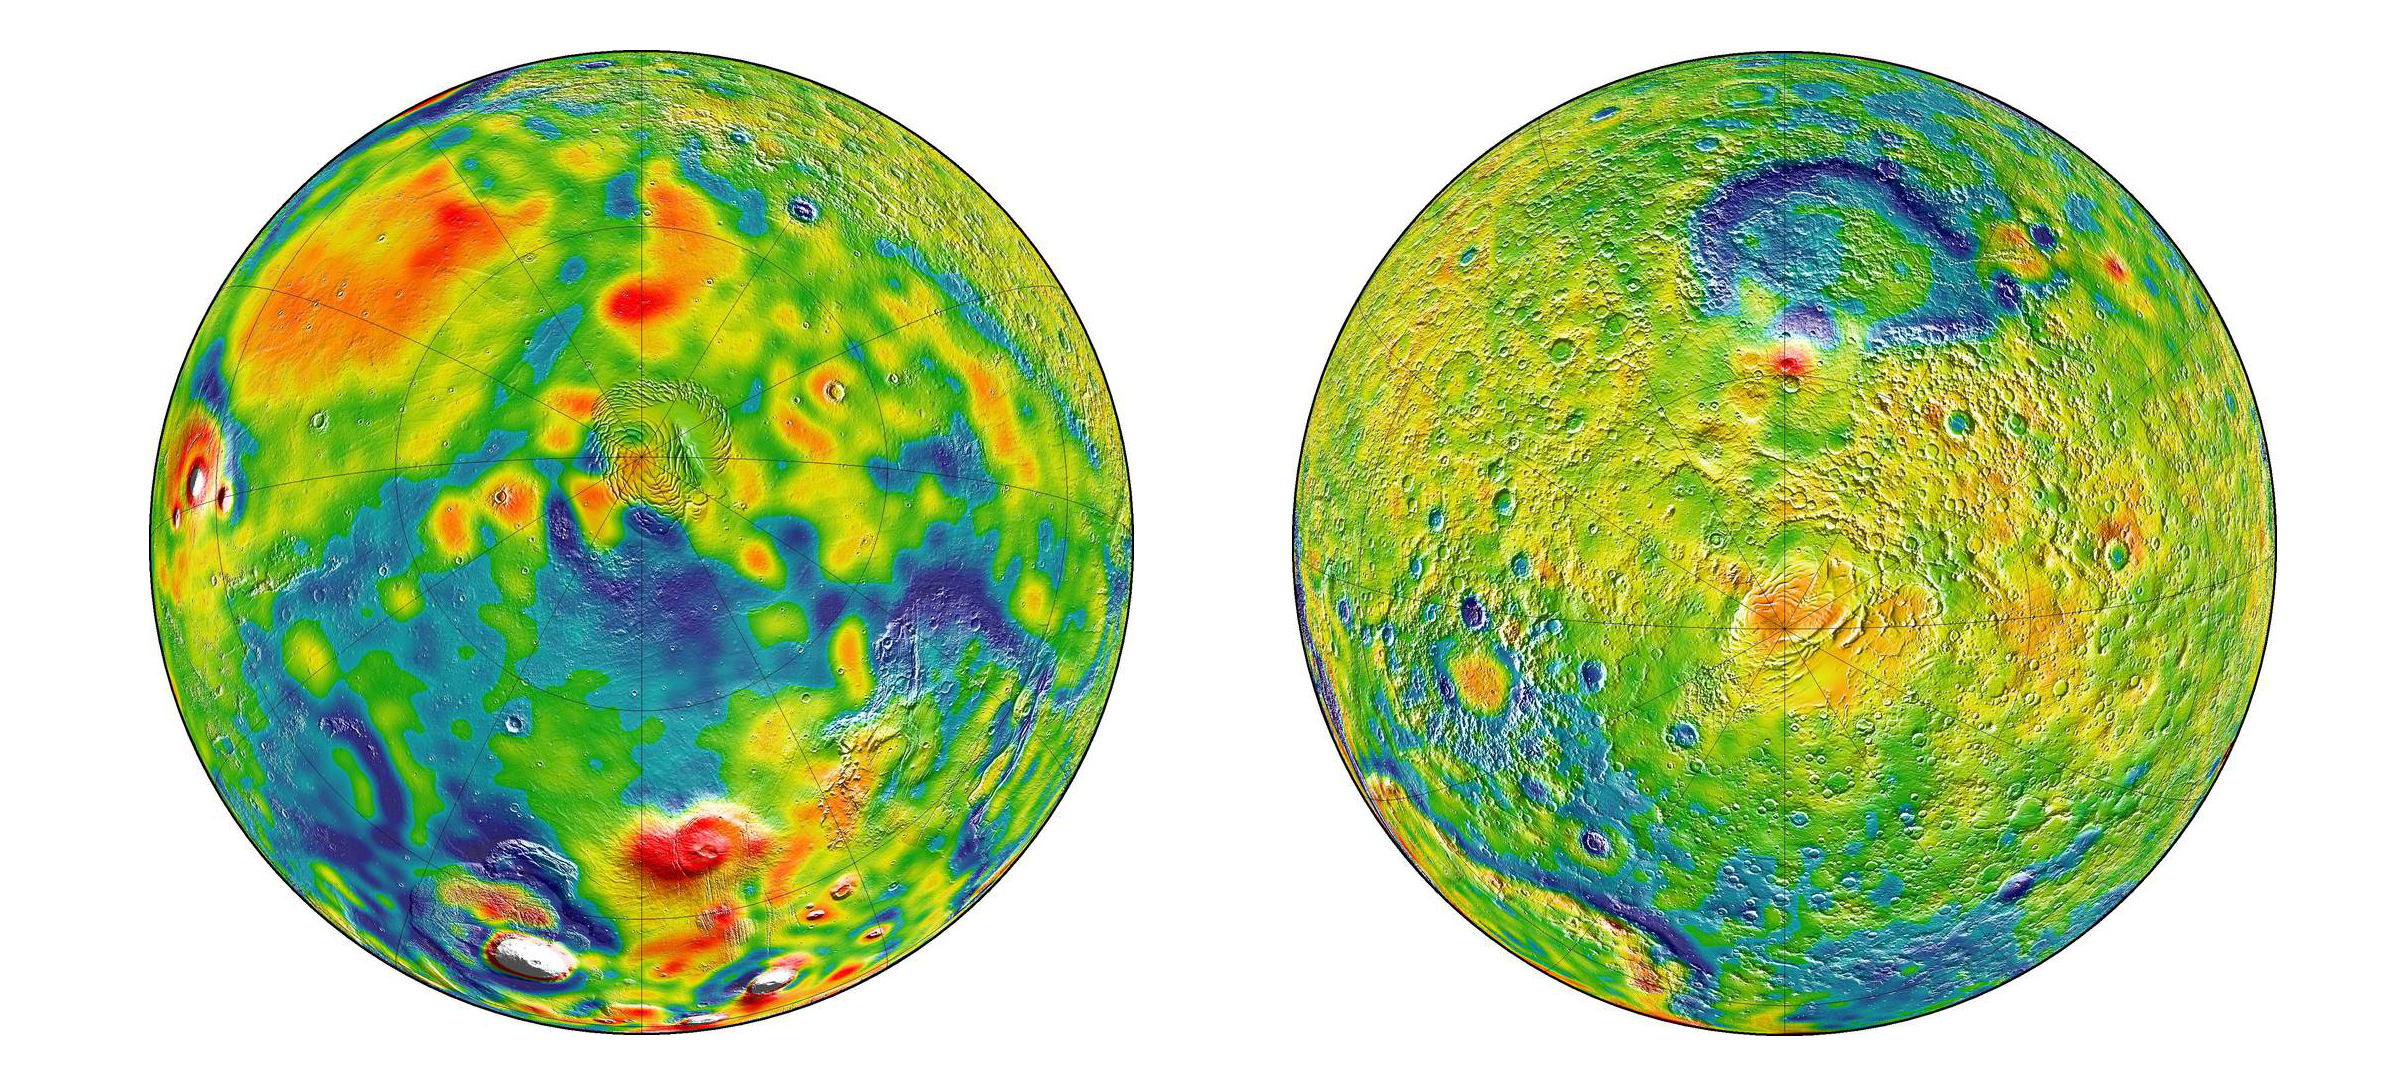 The Most Detailed Gravity Maps Of Mars Let Us Peer Inside The Planet